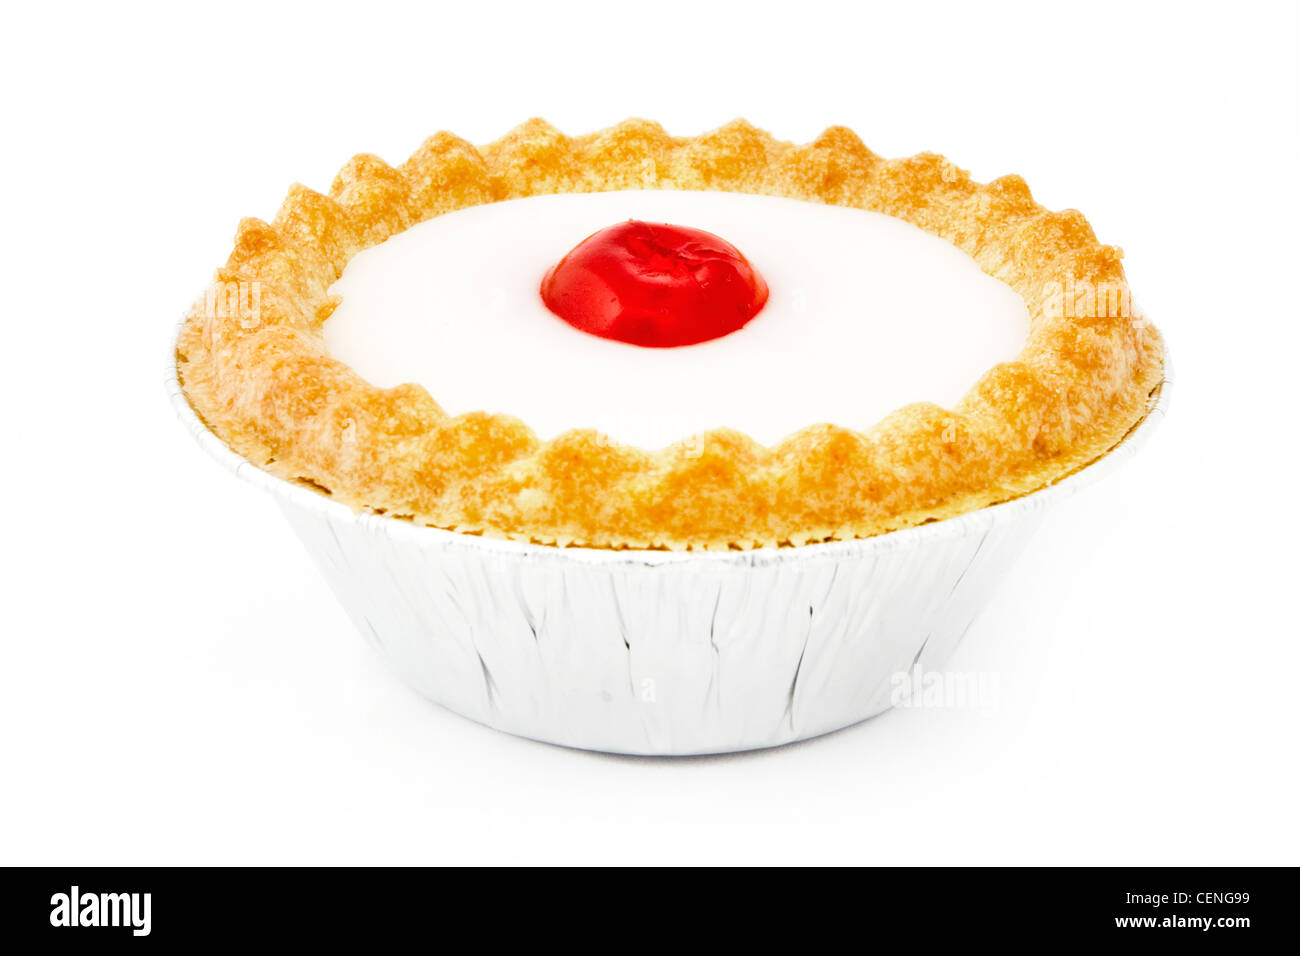 Bakewell tart on a white background Stock Photo